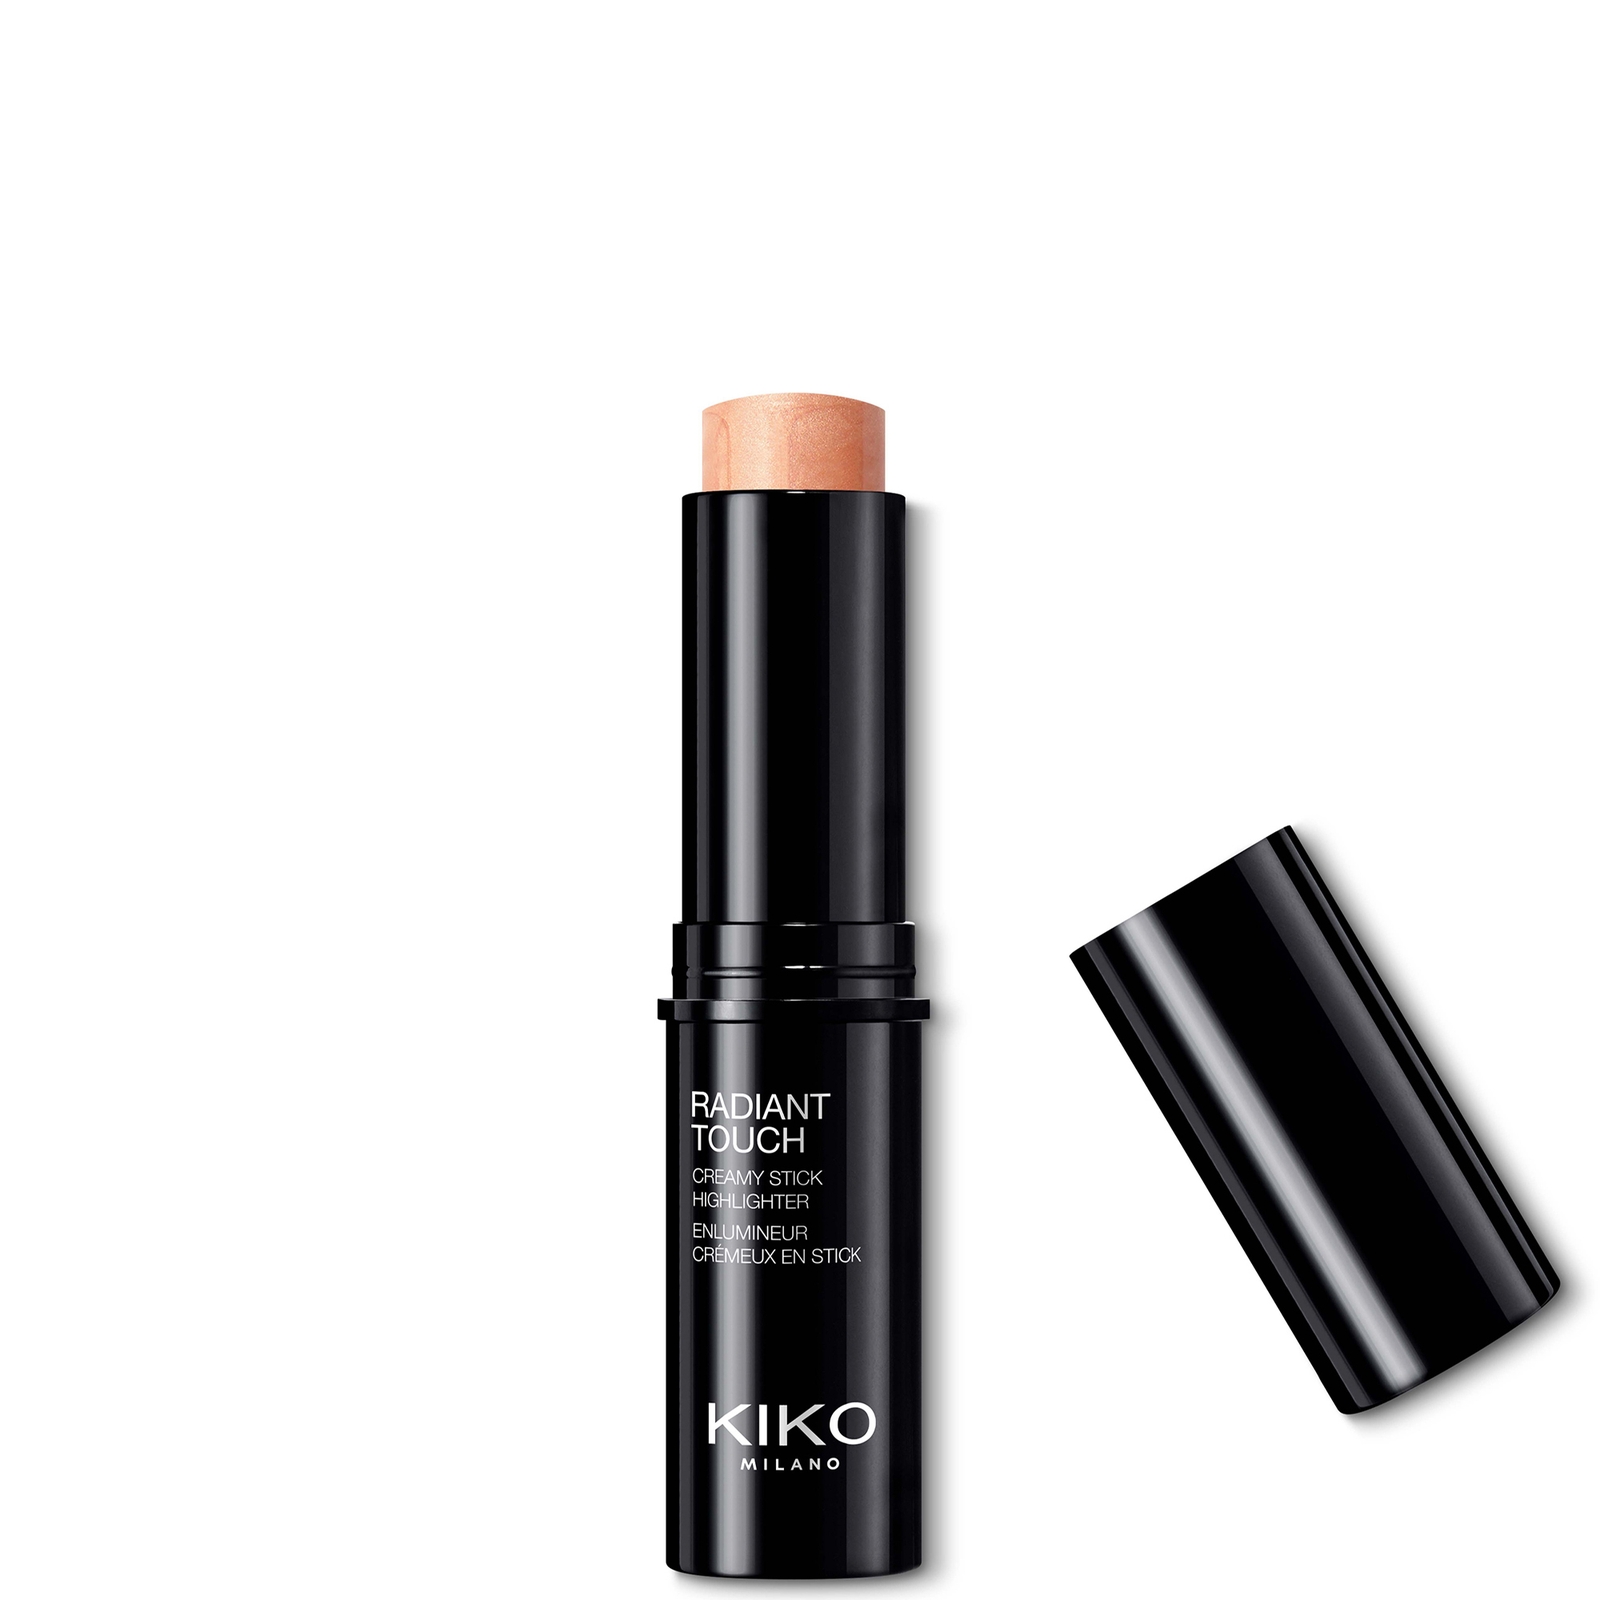 KIKO Milano Radiant Touch Creamy Stick Highlighter 10g (Various Shades) - 102 Golden Biscuit